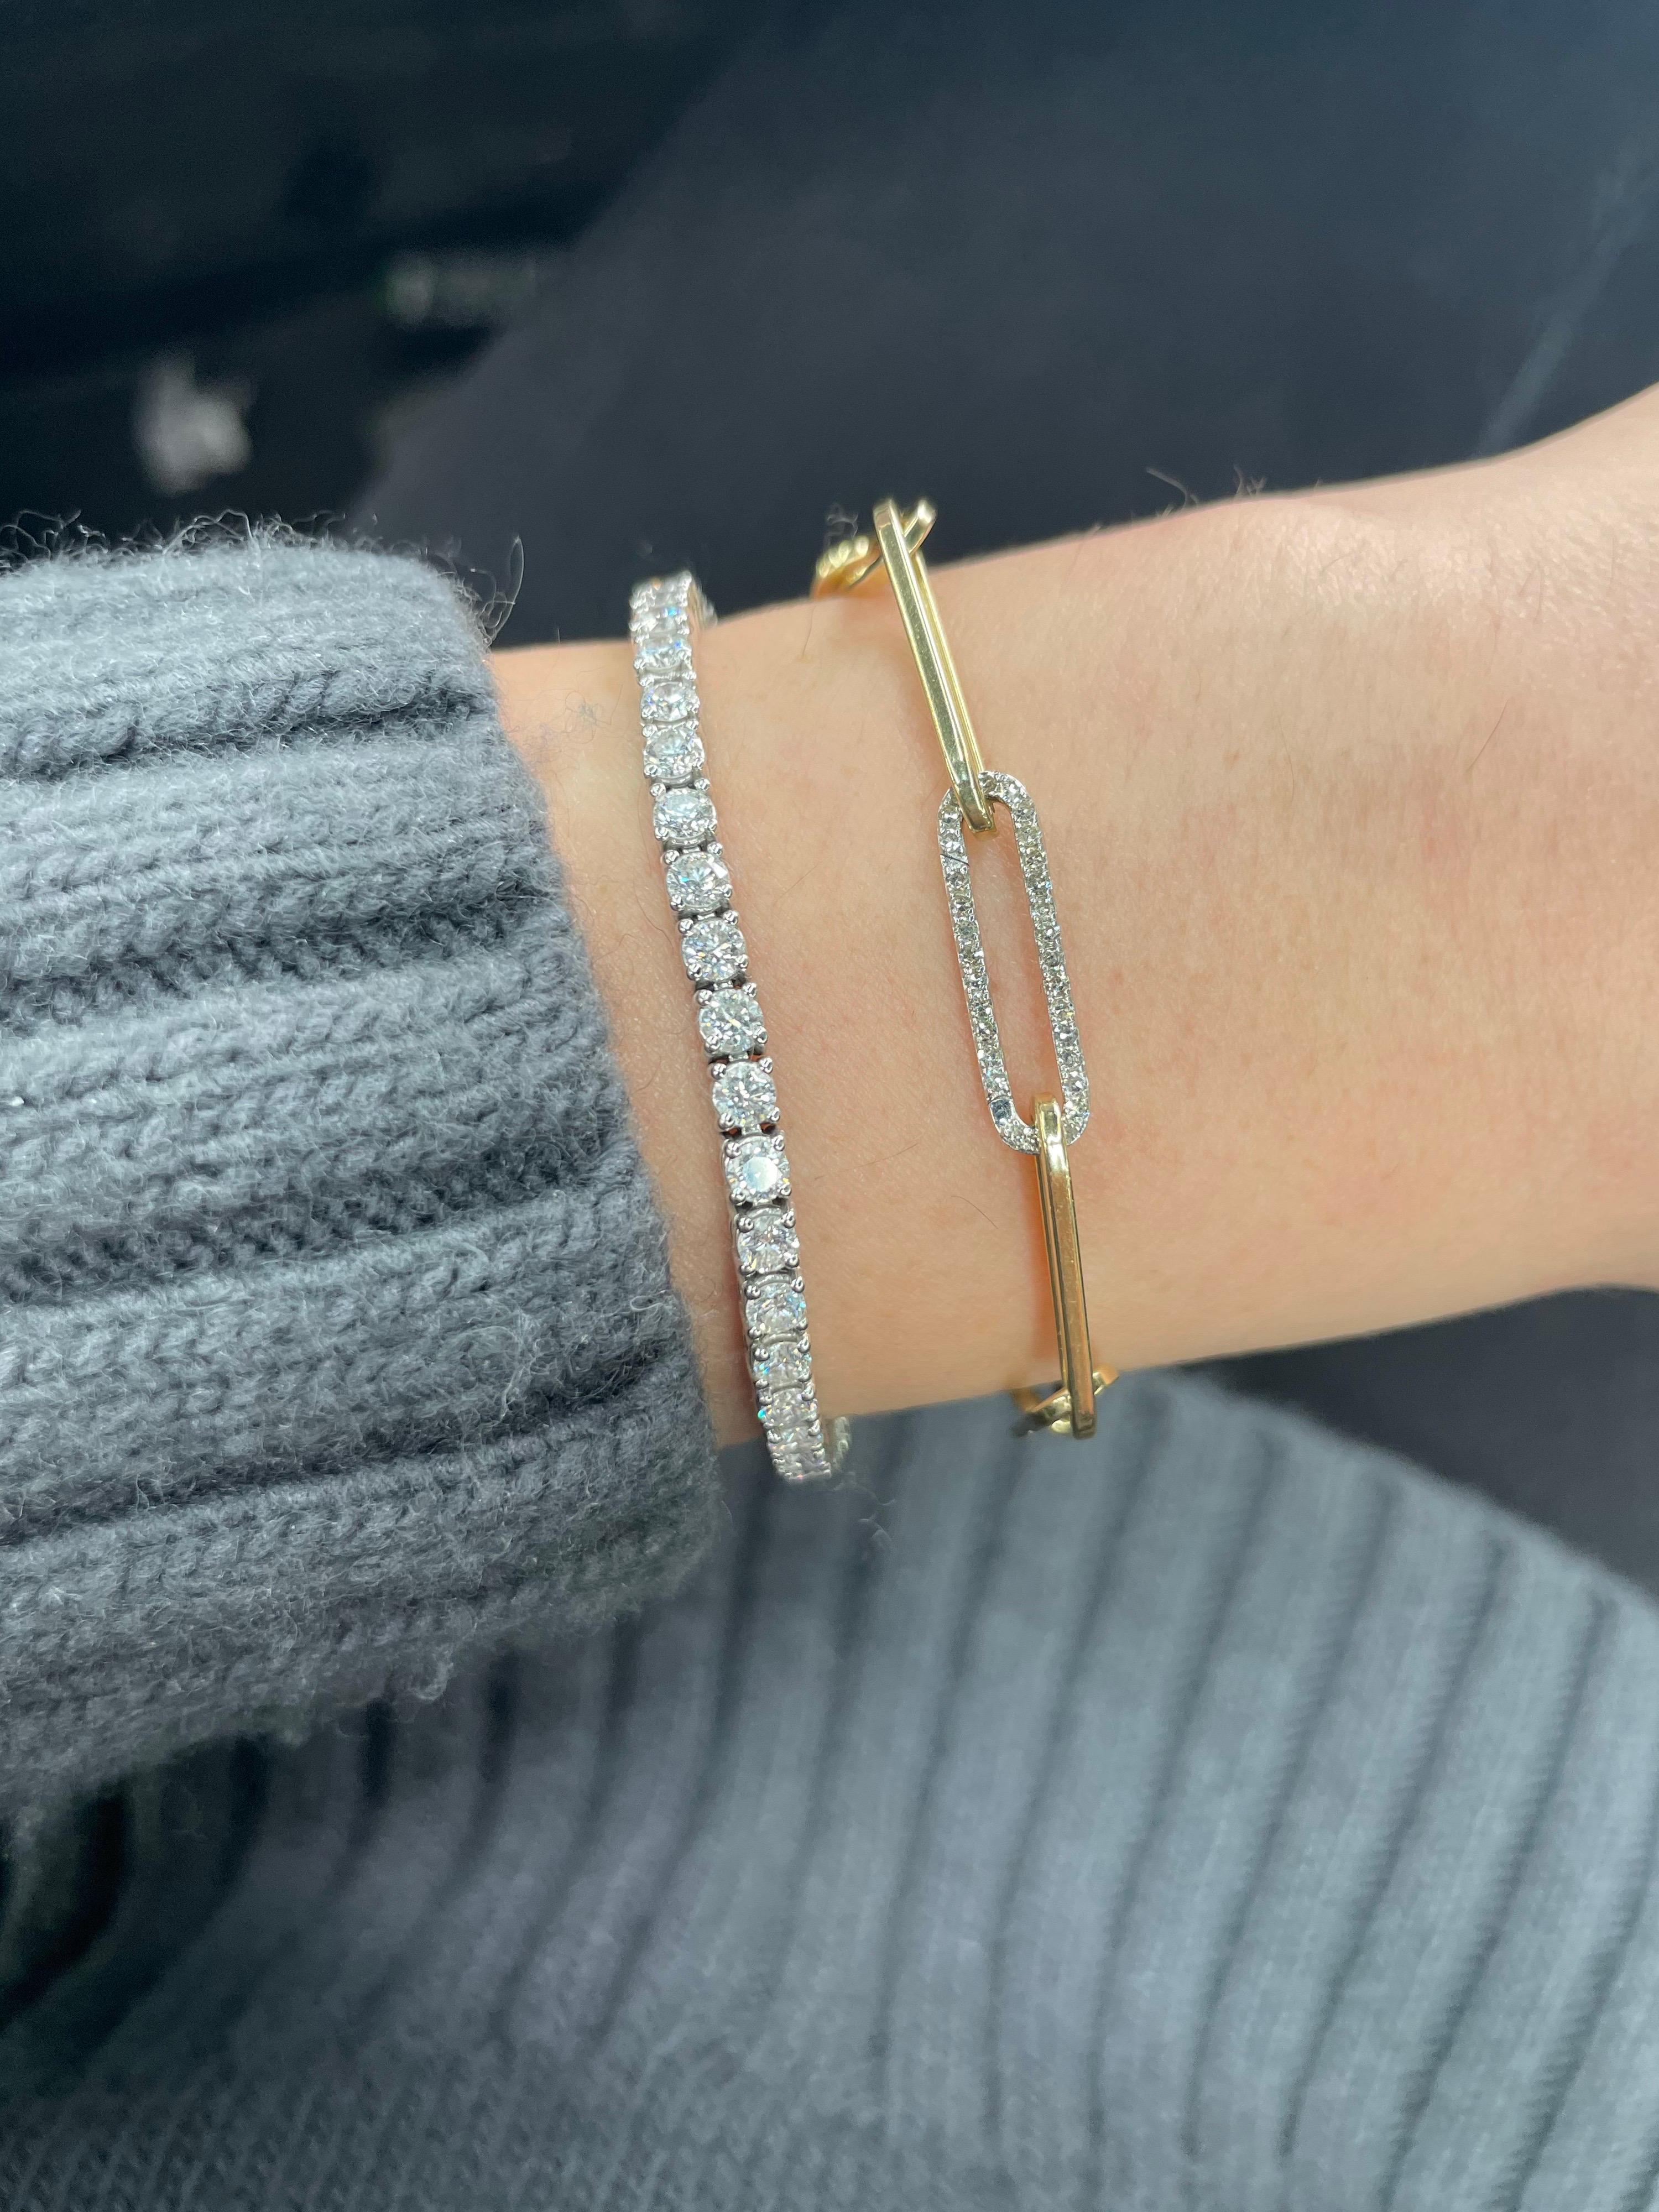 Trendy 14 karat yellow gold paperclip link bracelet featuring a diamond link clasp. Each gold link is 0.82 inches. Made in Italy. 
Great to stack!
More clasp available, email for more photos and different styles.